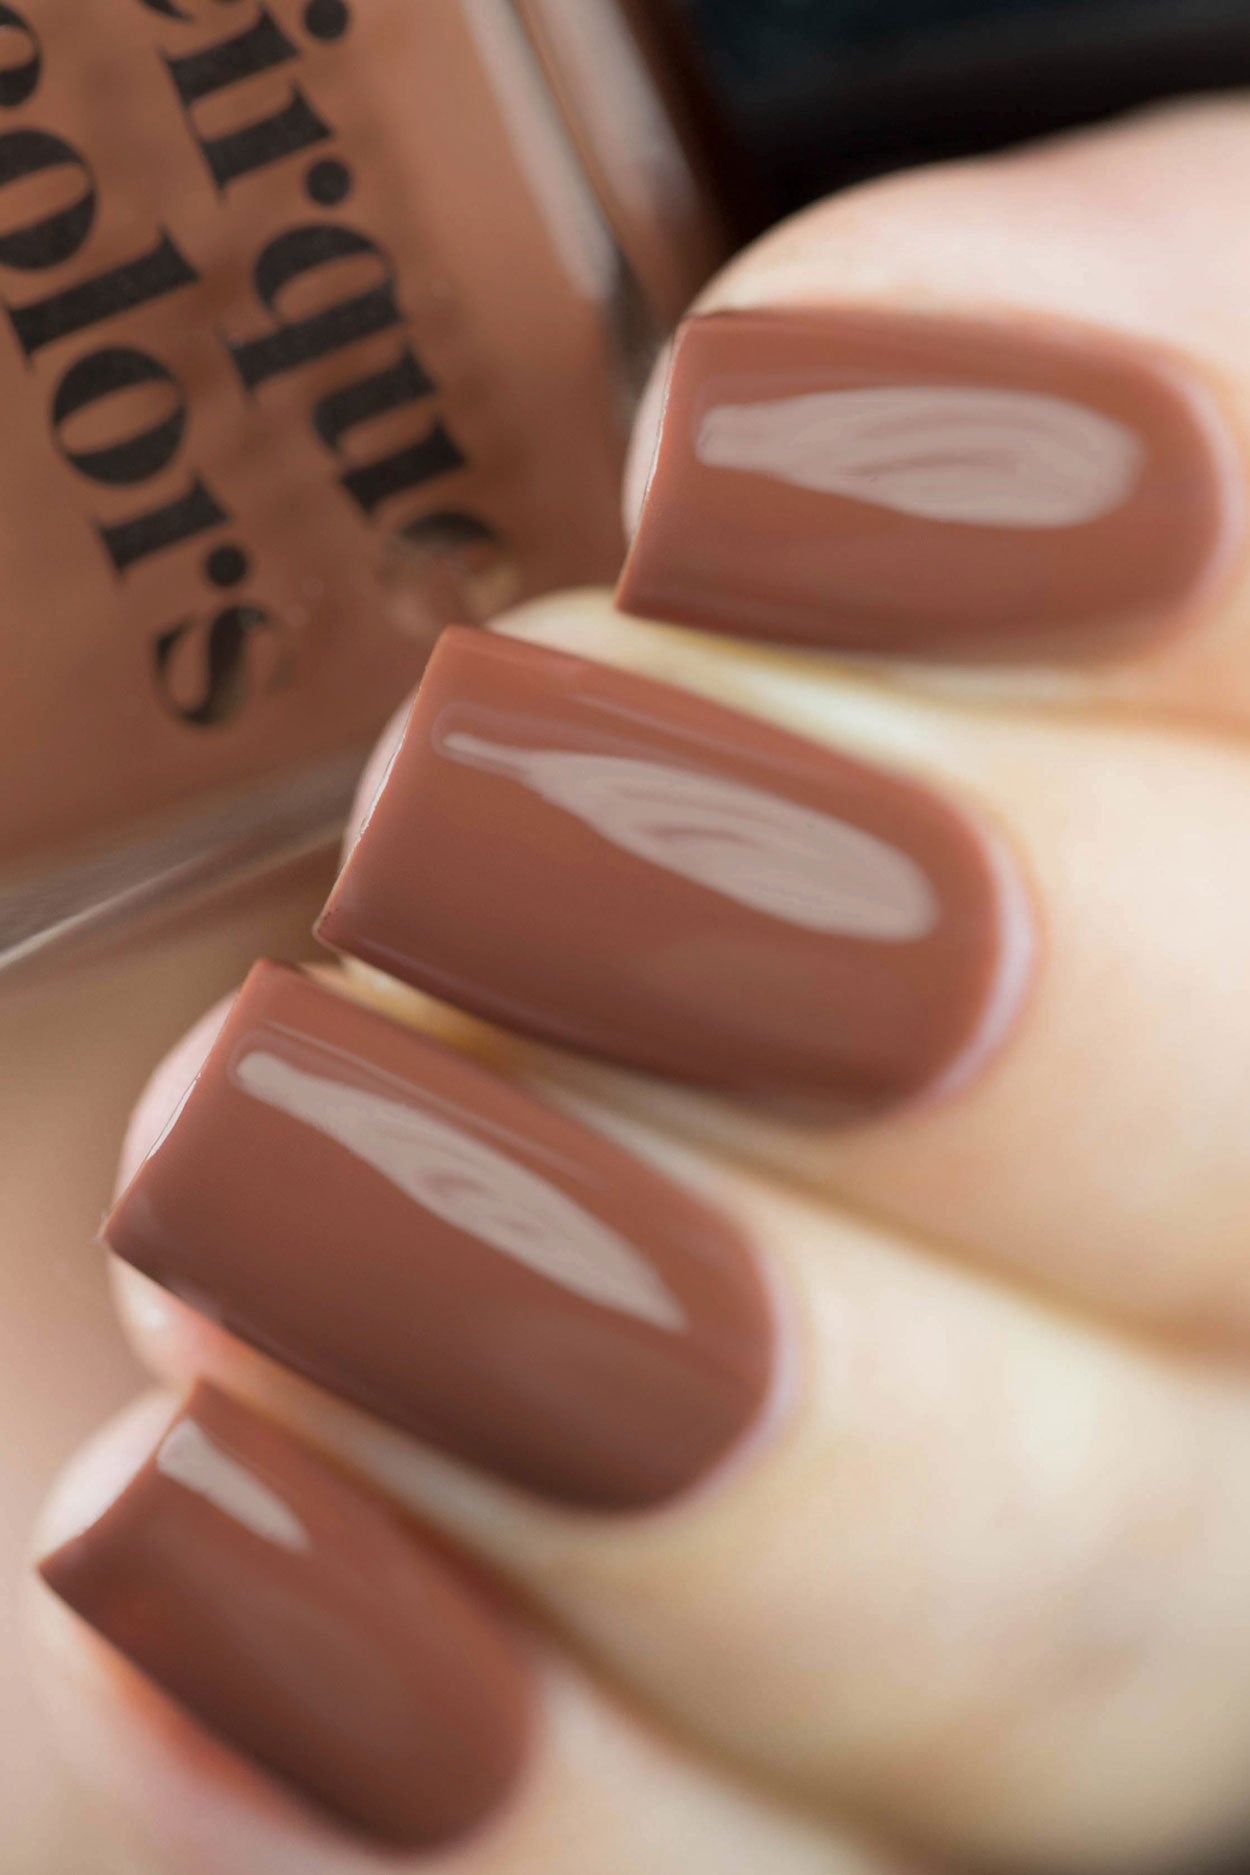 10 Iced Coffee Manicures That Are Keeping Us Cool This Summer